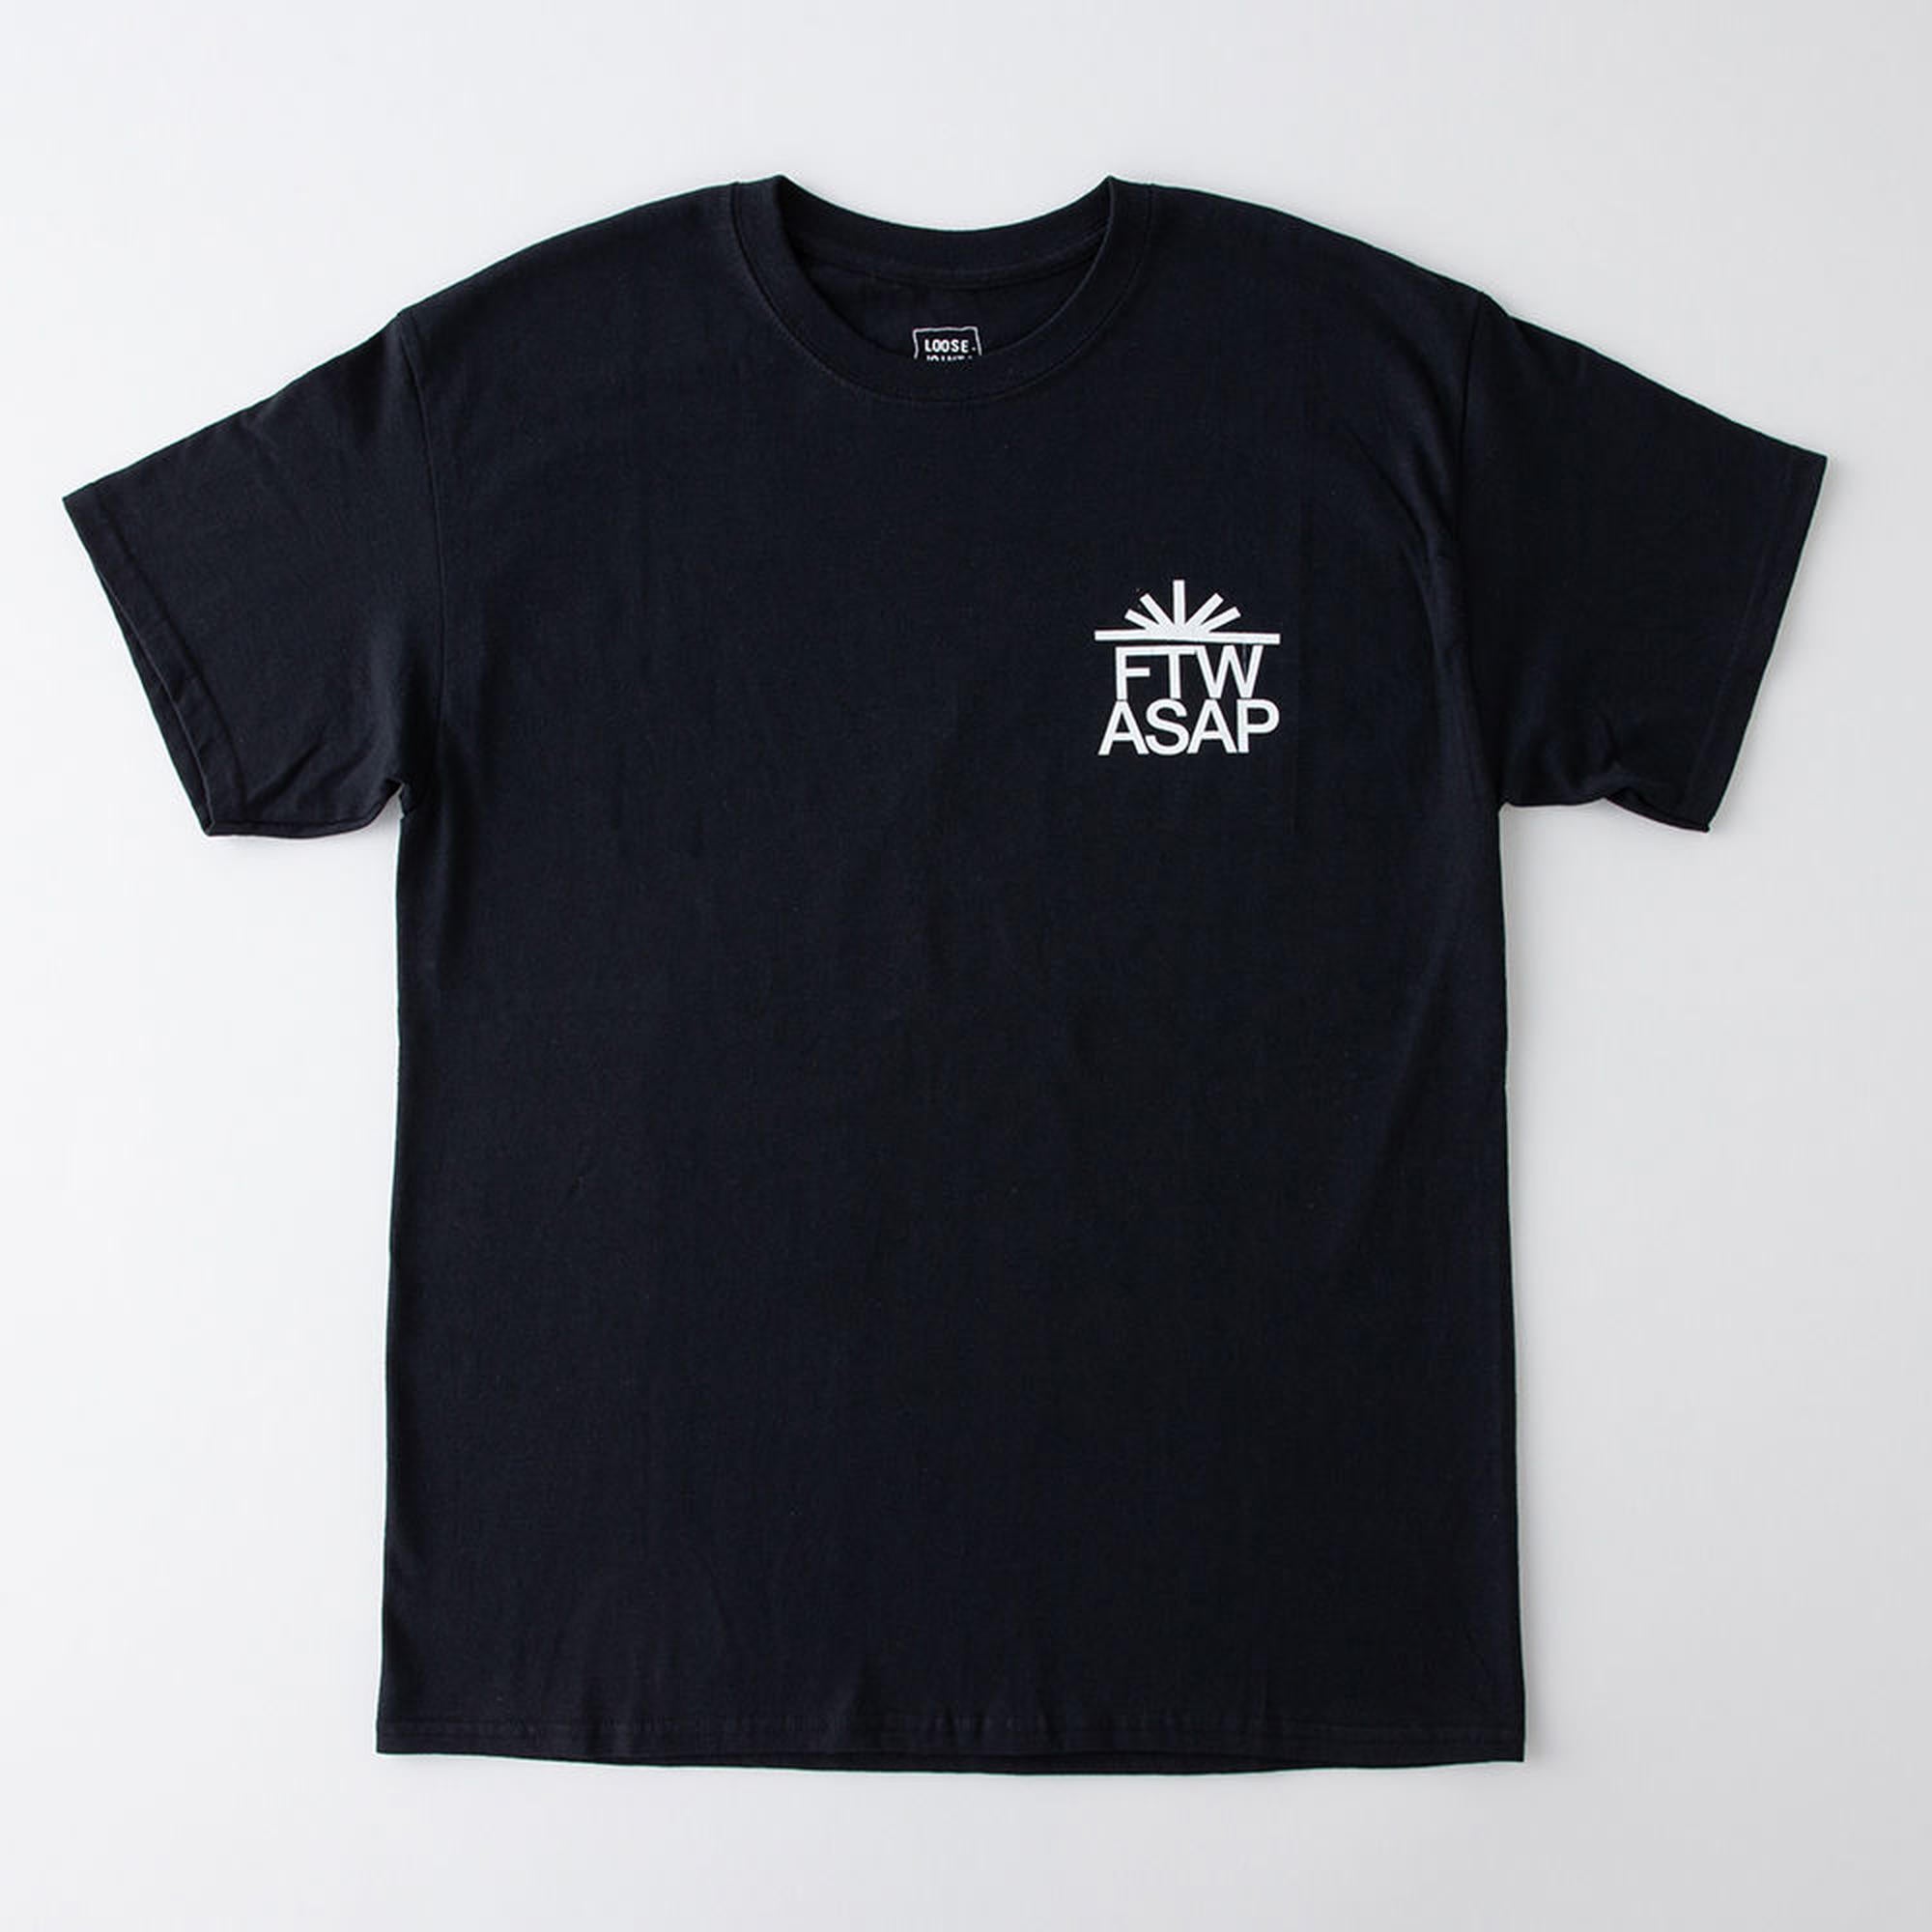 AD - 'Born to loose' S/S TEE